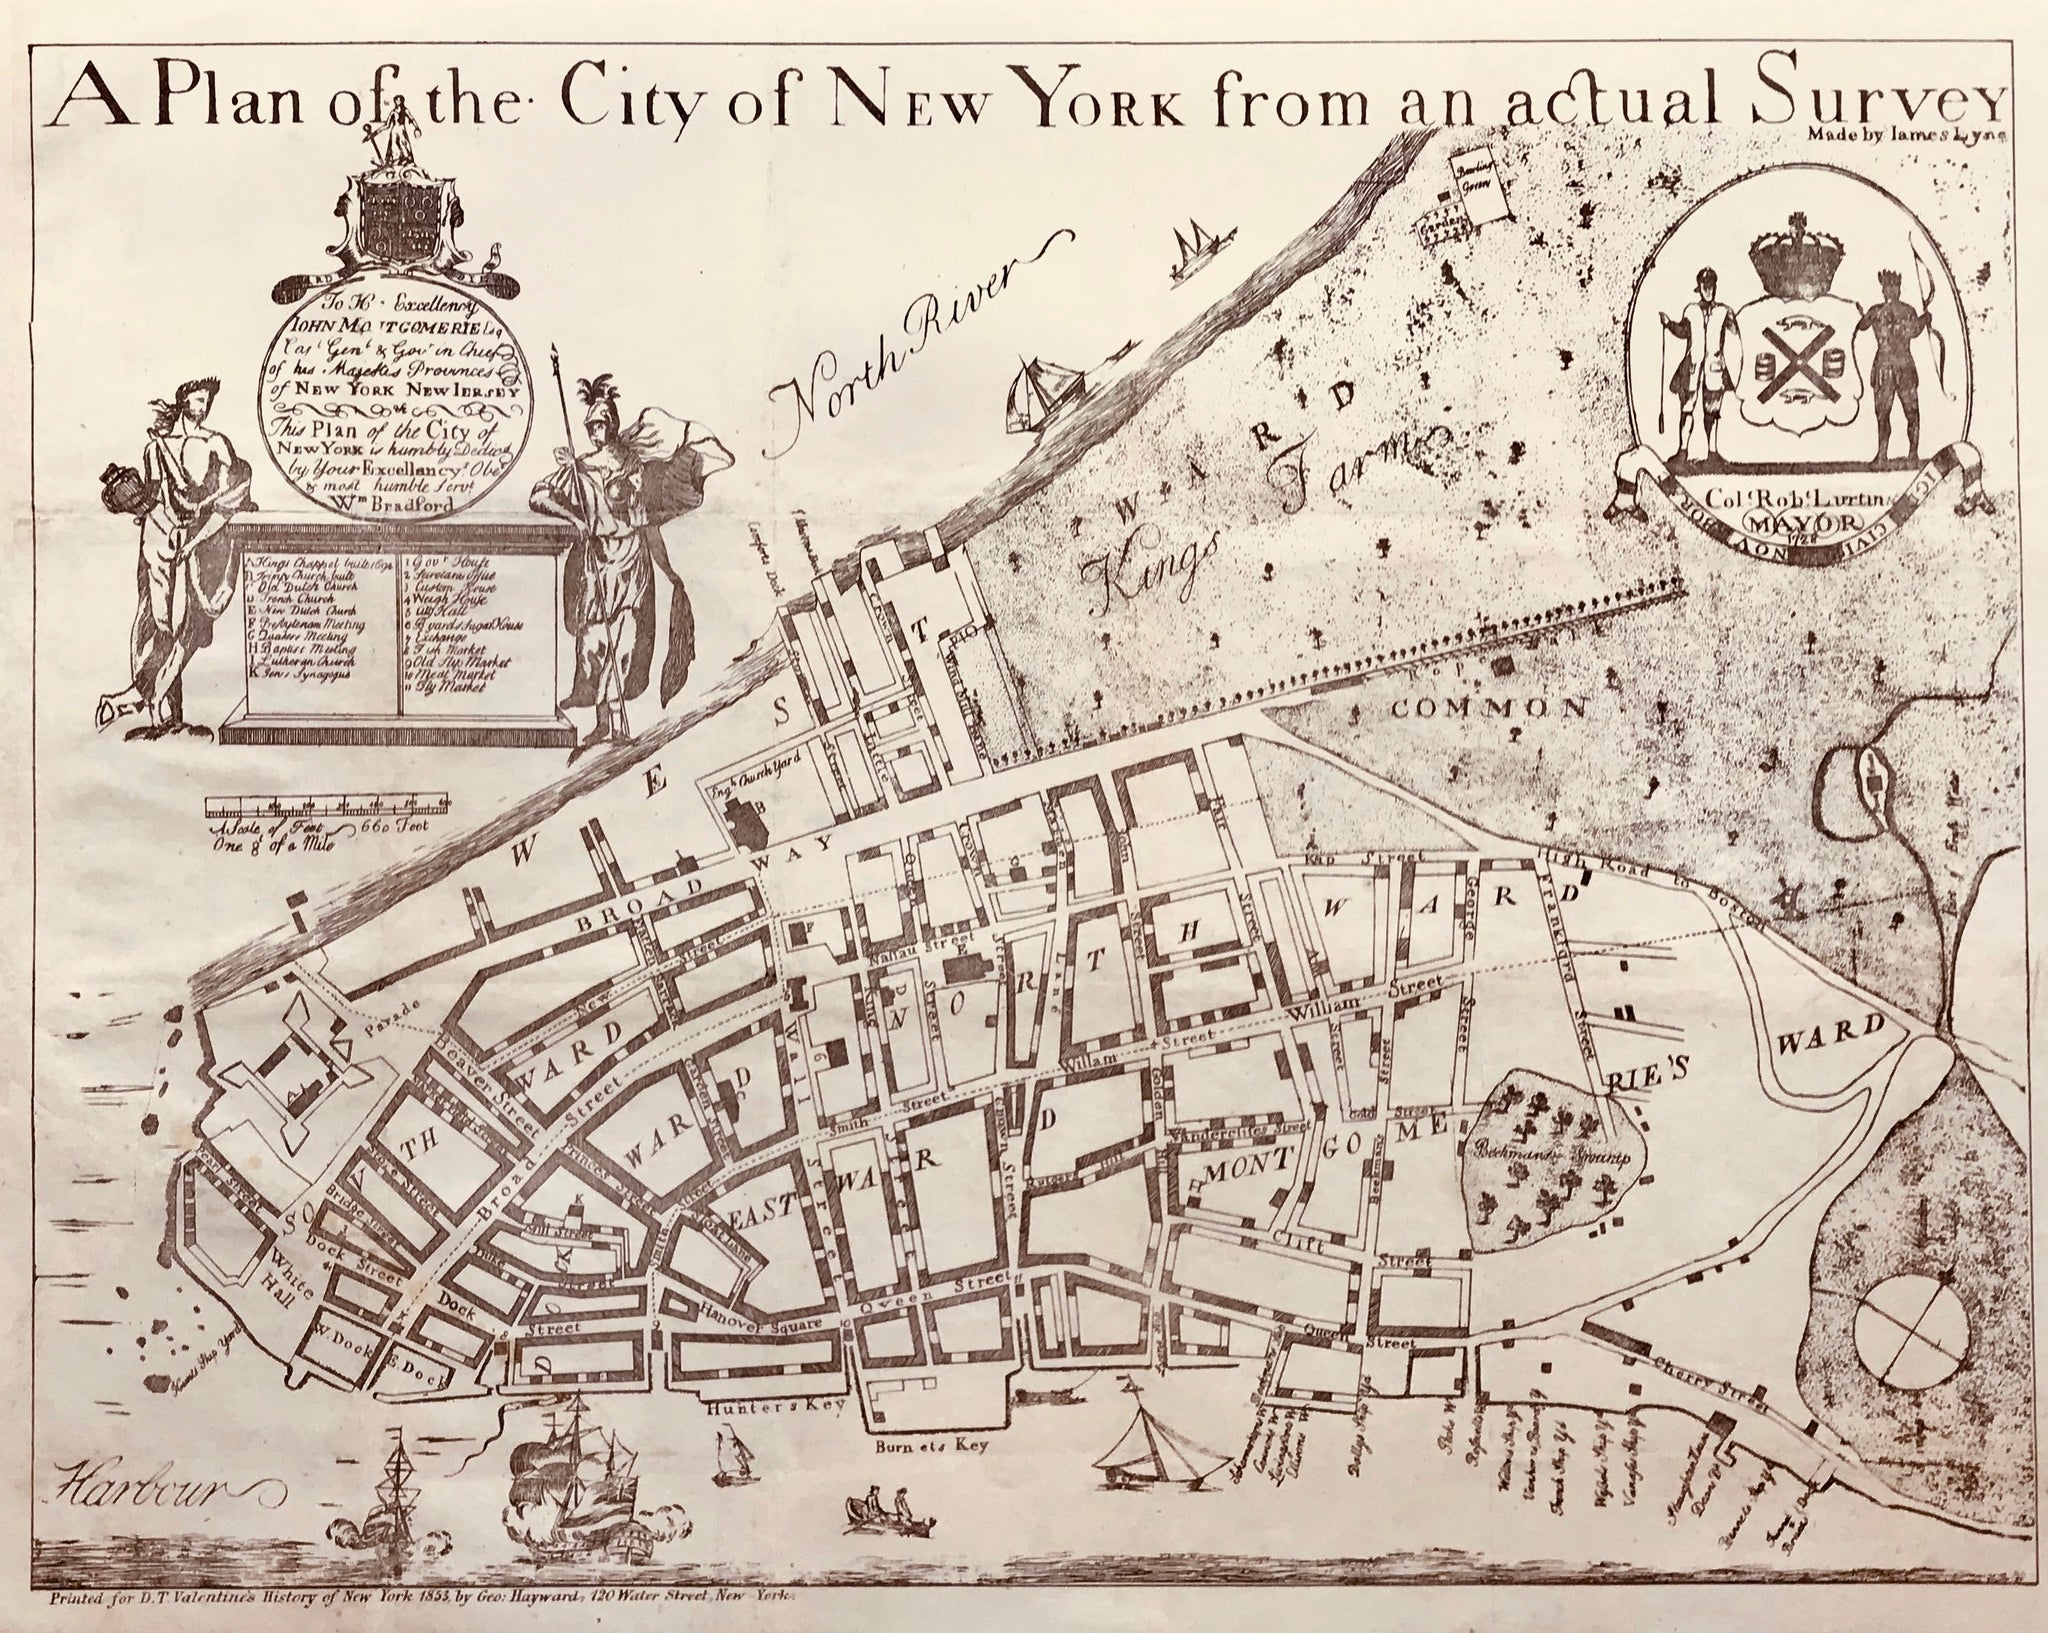 "A Plan of the City of New York from an actual Survey Made by James Lyne"  Lithograph. Published in "History of the City of New York" by David T. Valentine  New York, 1853  This lithograph shows the state of New York City in the year 1728.  Valentine describes the City of New York from early on when it was still called New Amsterdam. In 1728 Manhattan had already grown to a huge city. This large lithograph had been folded vertically and horizontally several times to fit into the octavo book size.